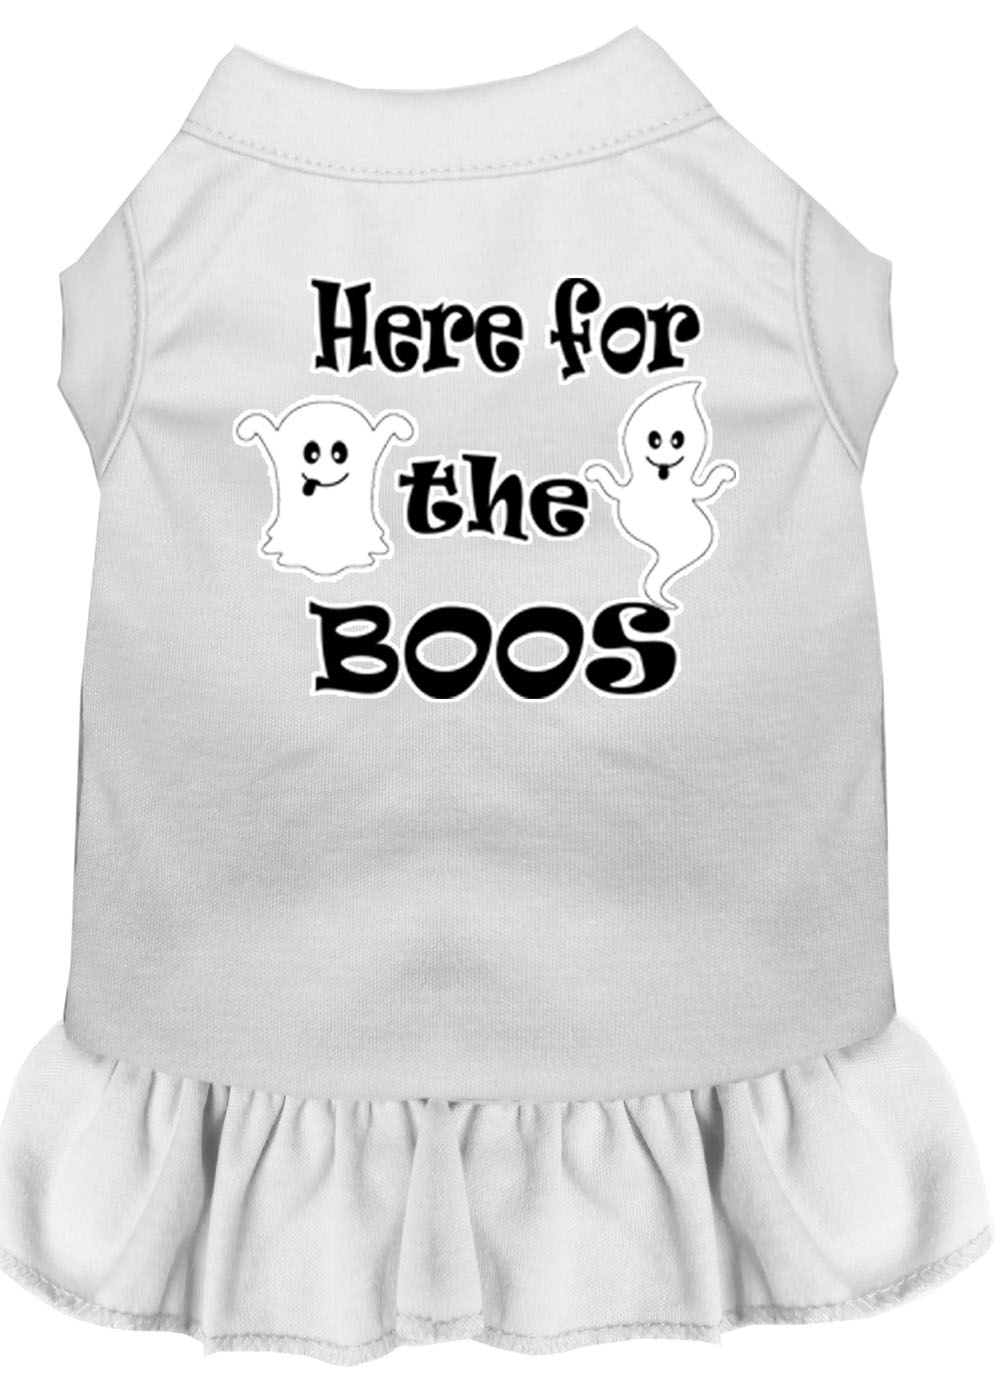 Here for the Boos Screen Print Dog Dress White 4X (22)